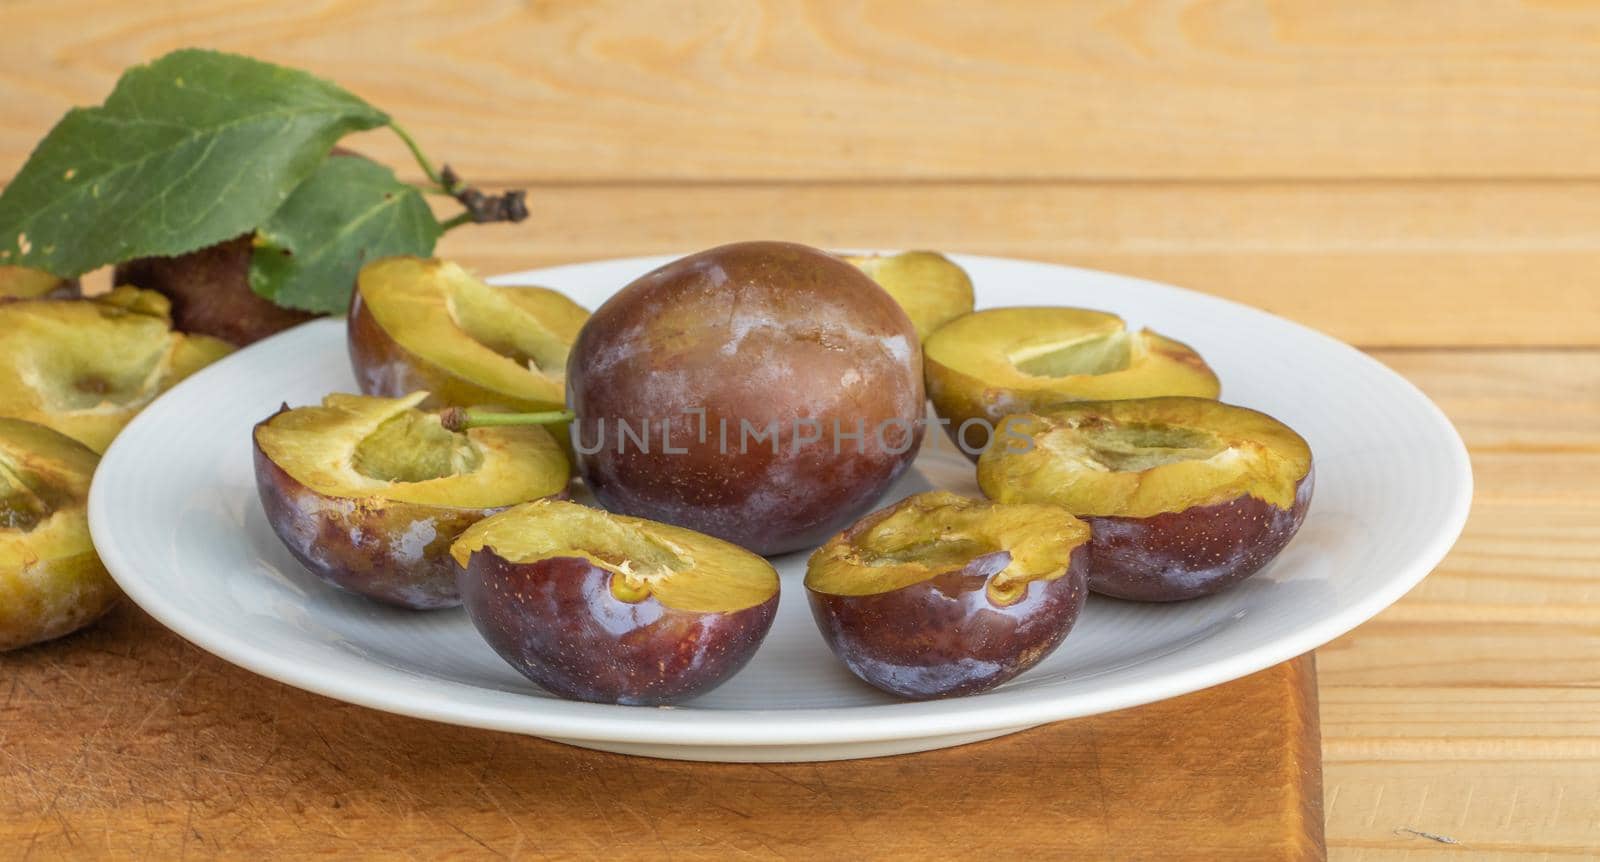 Fresh juicy plums on a wooden background.